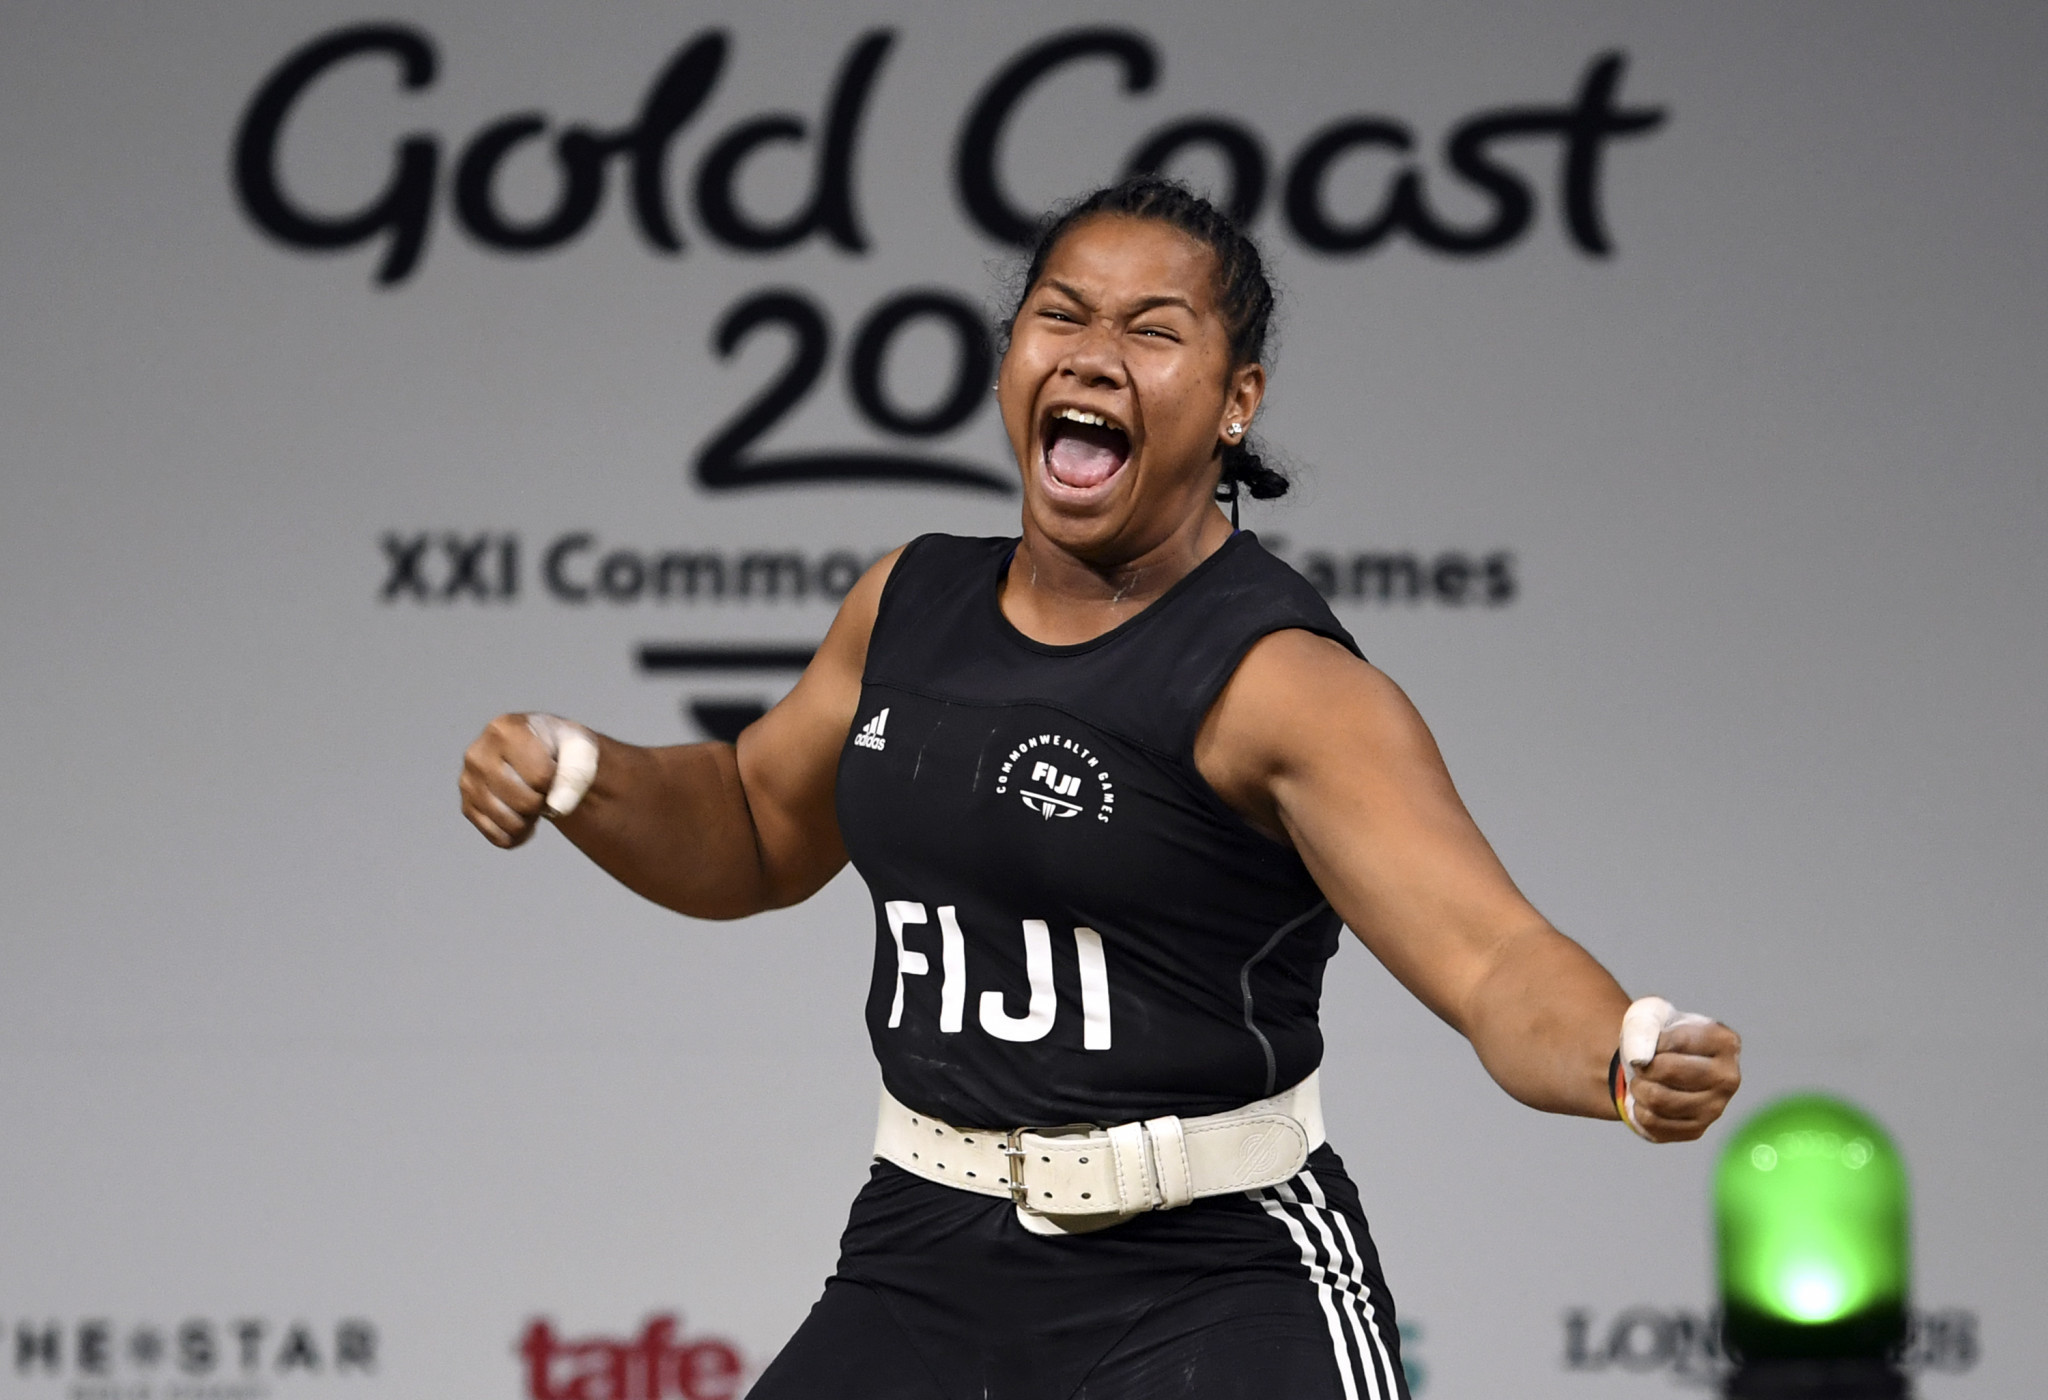 Weightlifer Eileen Cikamatana won gold for Fiji at Gold Coast 2018 but has now switched alliegances to Australia ©Getty Images